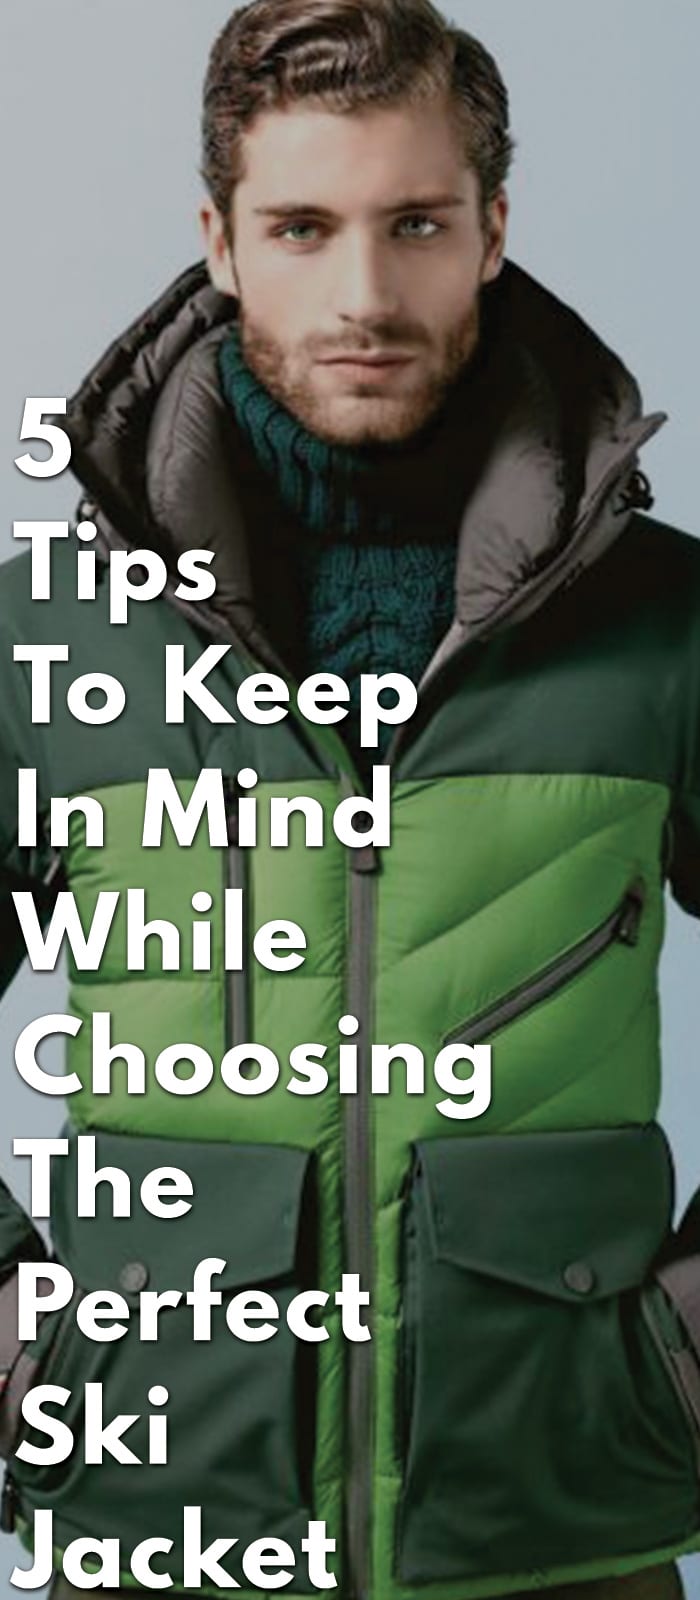 5-Tips-To-Keep-In-Mind-While-Choosing-The-Perfect-Ski-Jacket